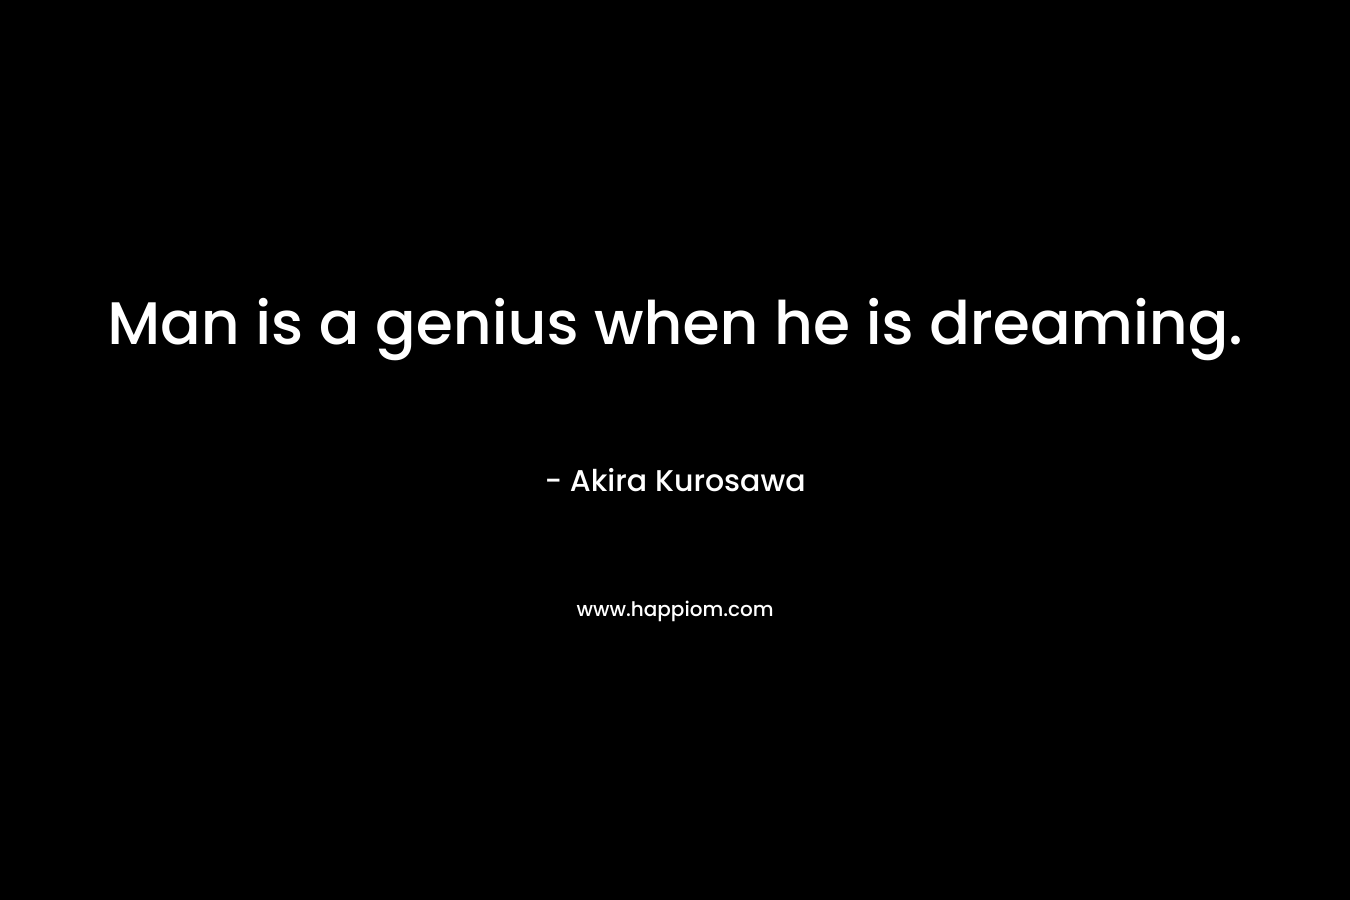 Man is a genius when he is dreaming.